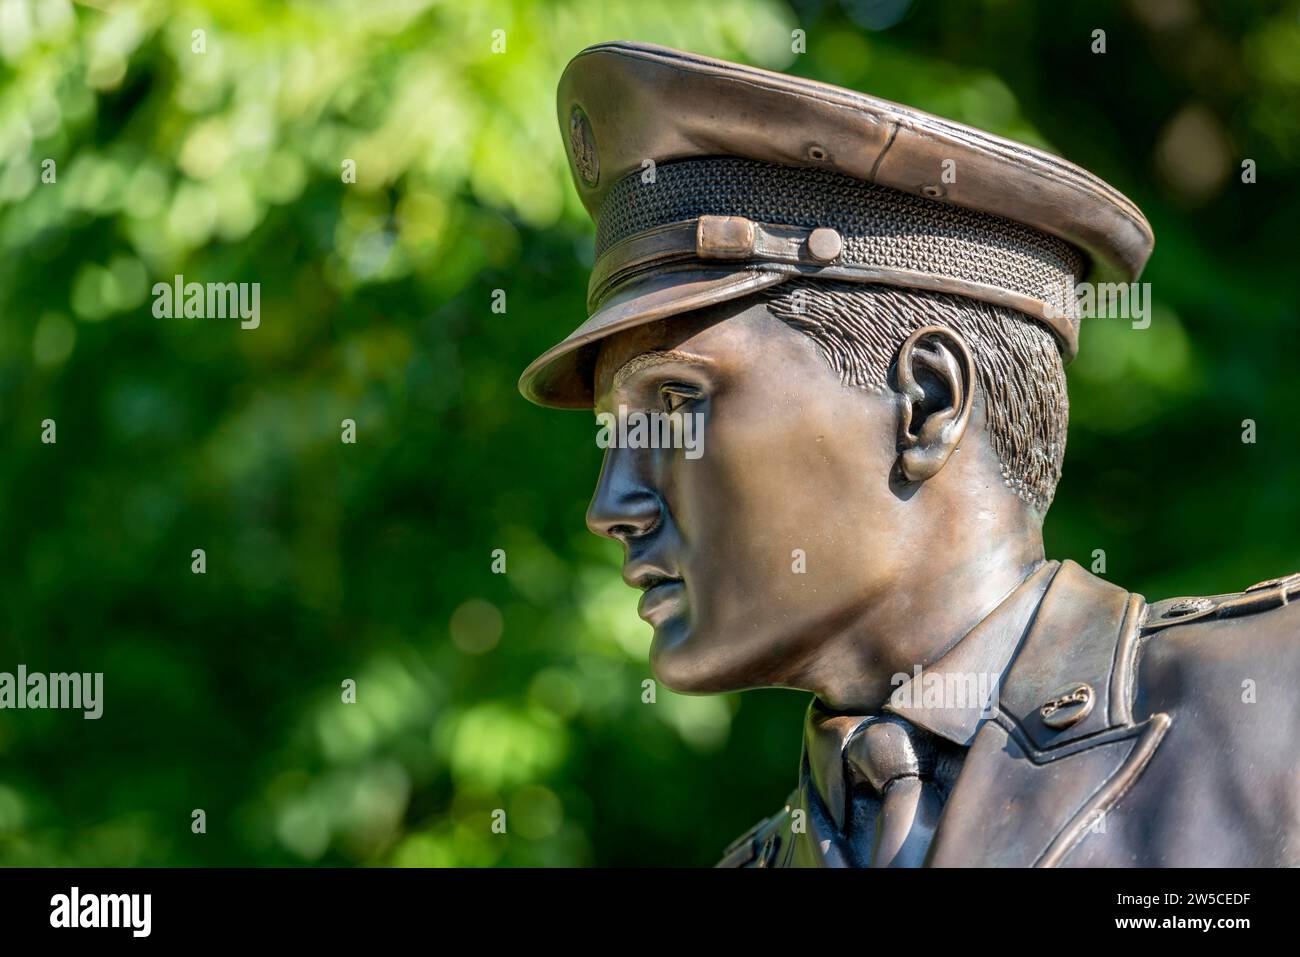 Bronze statue, monument to rock singer Elvis Presley, King of Rock 'n' Roll as a soldier in uniform of the 3rd US Armoured Division Spearhead, bridge Stock Photo